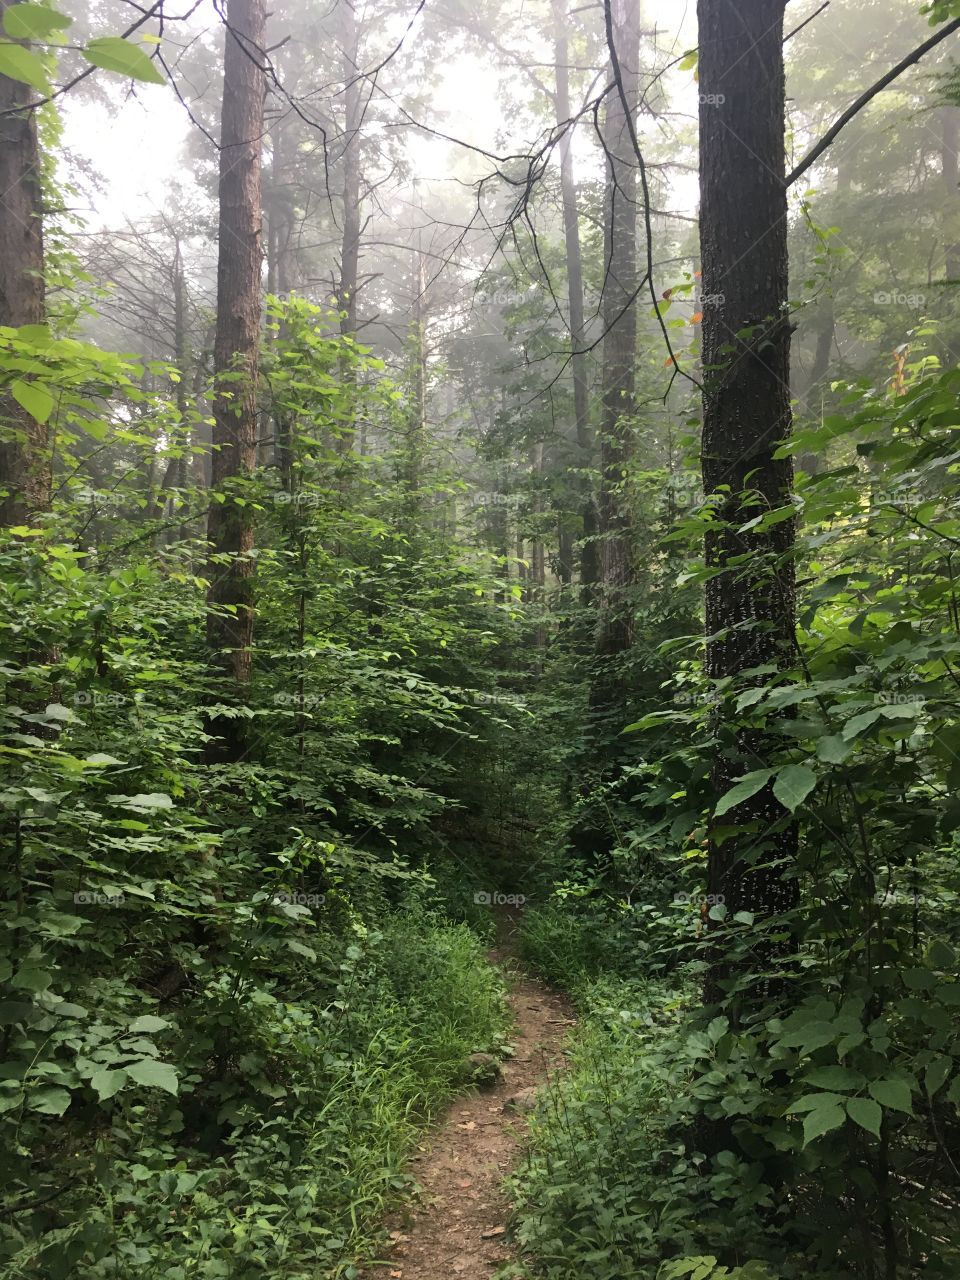 Morning misty walk through the woods of New England